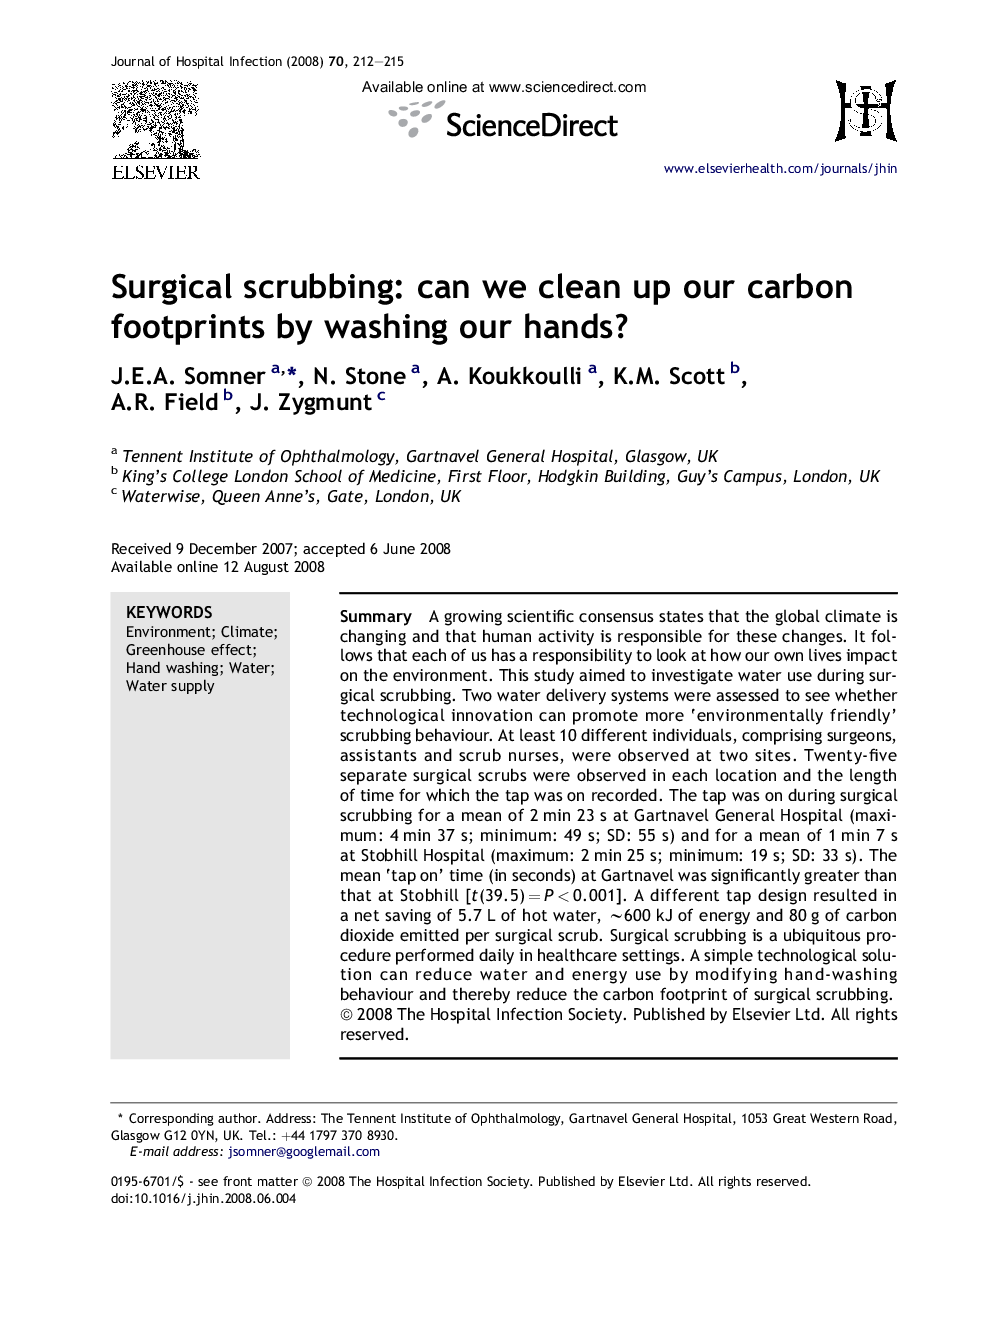 Surgical scrubbing: can we clean up our carbon footprints by washing our hands?